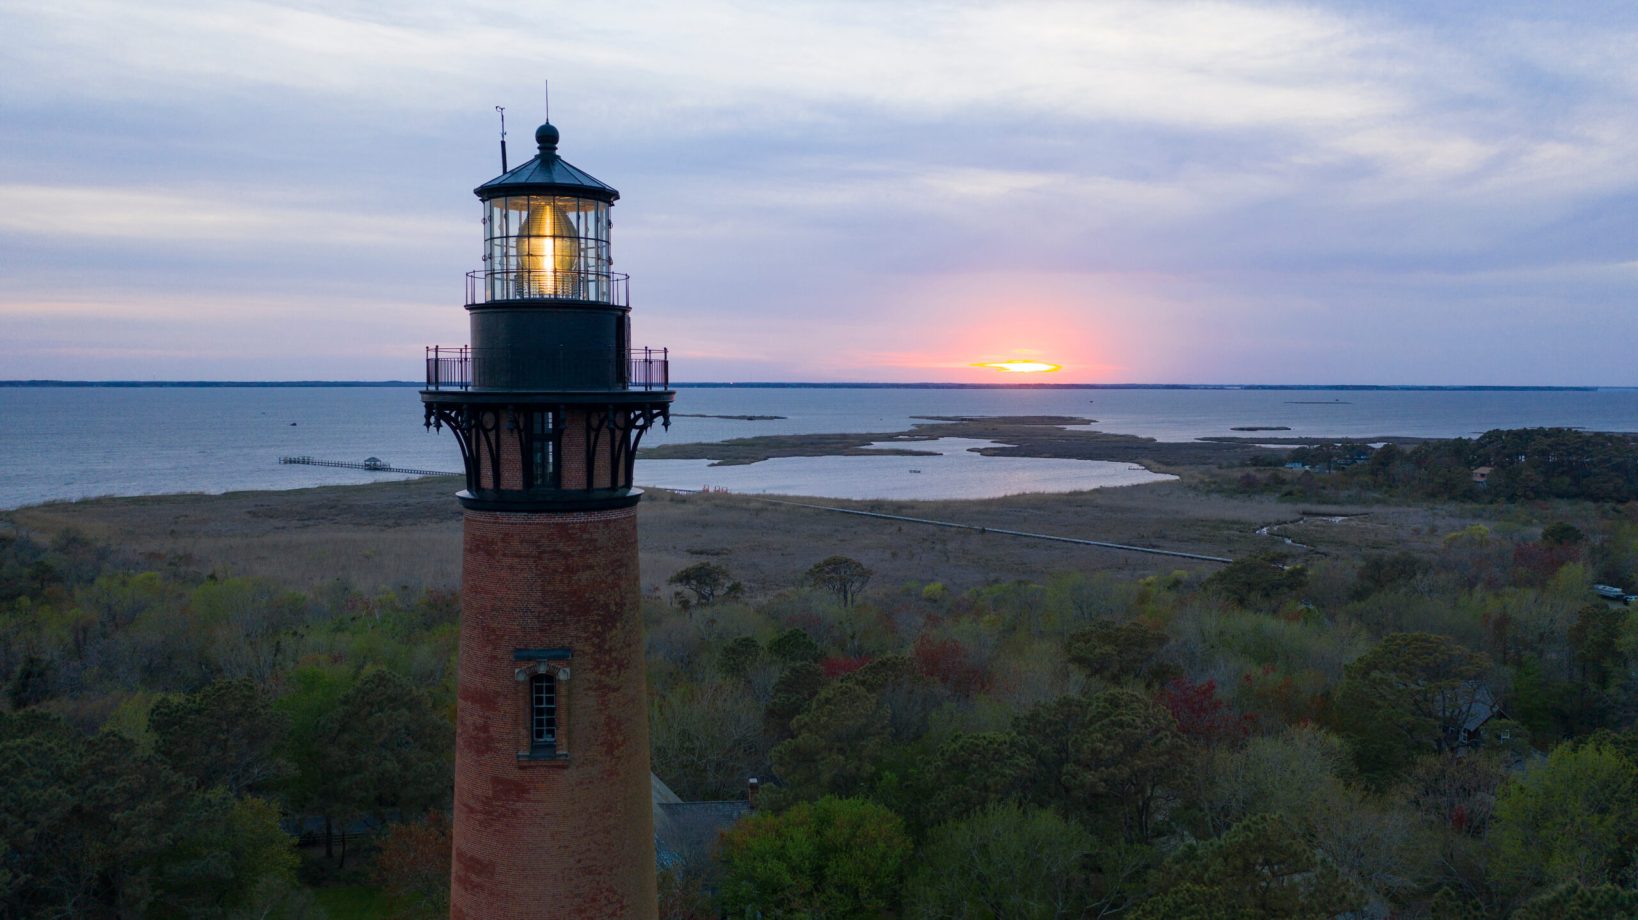 Sun Setting at Currituck Lighthouse over Outer Banks, North Carolina